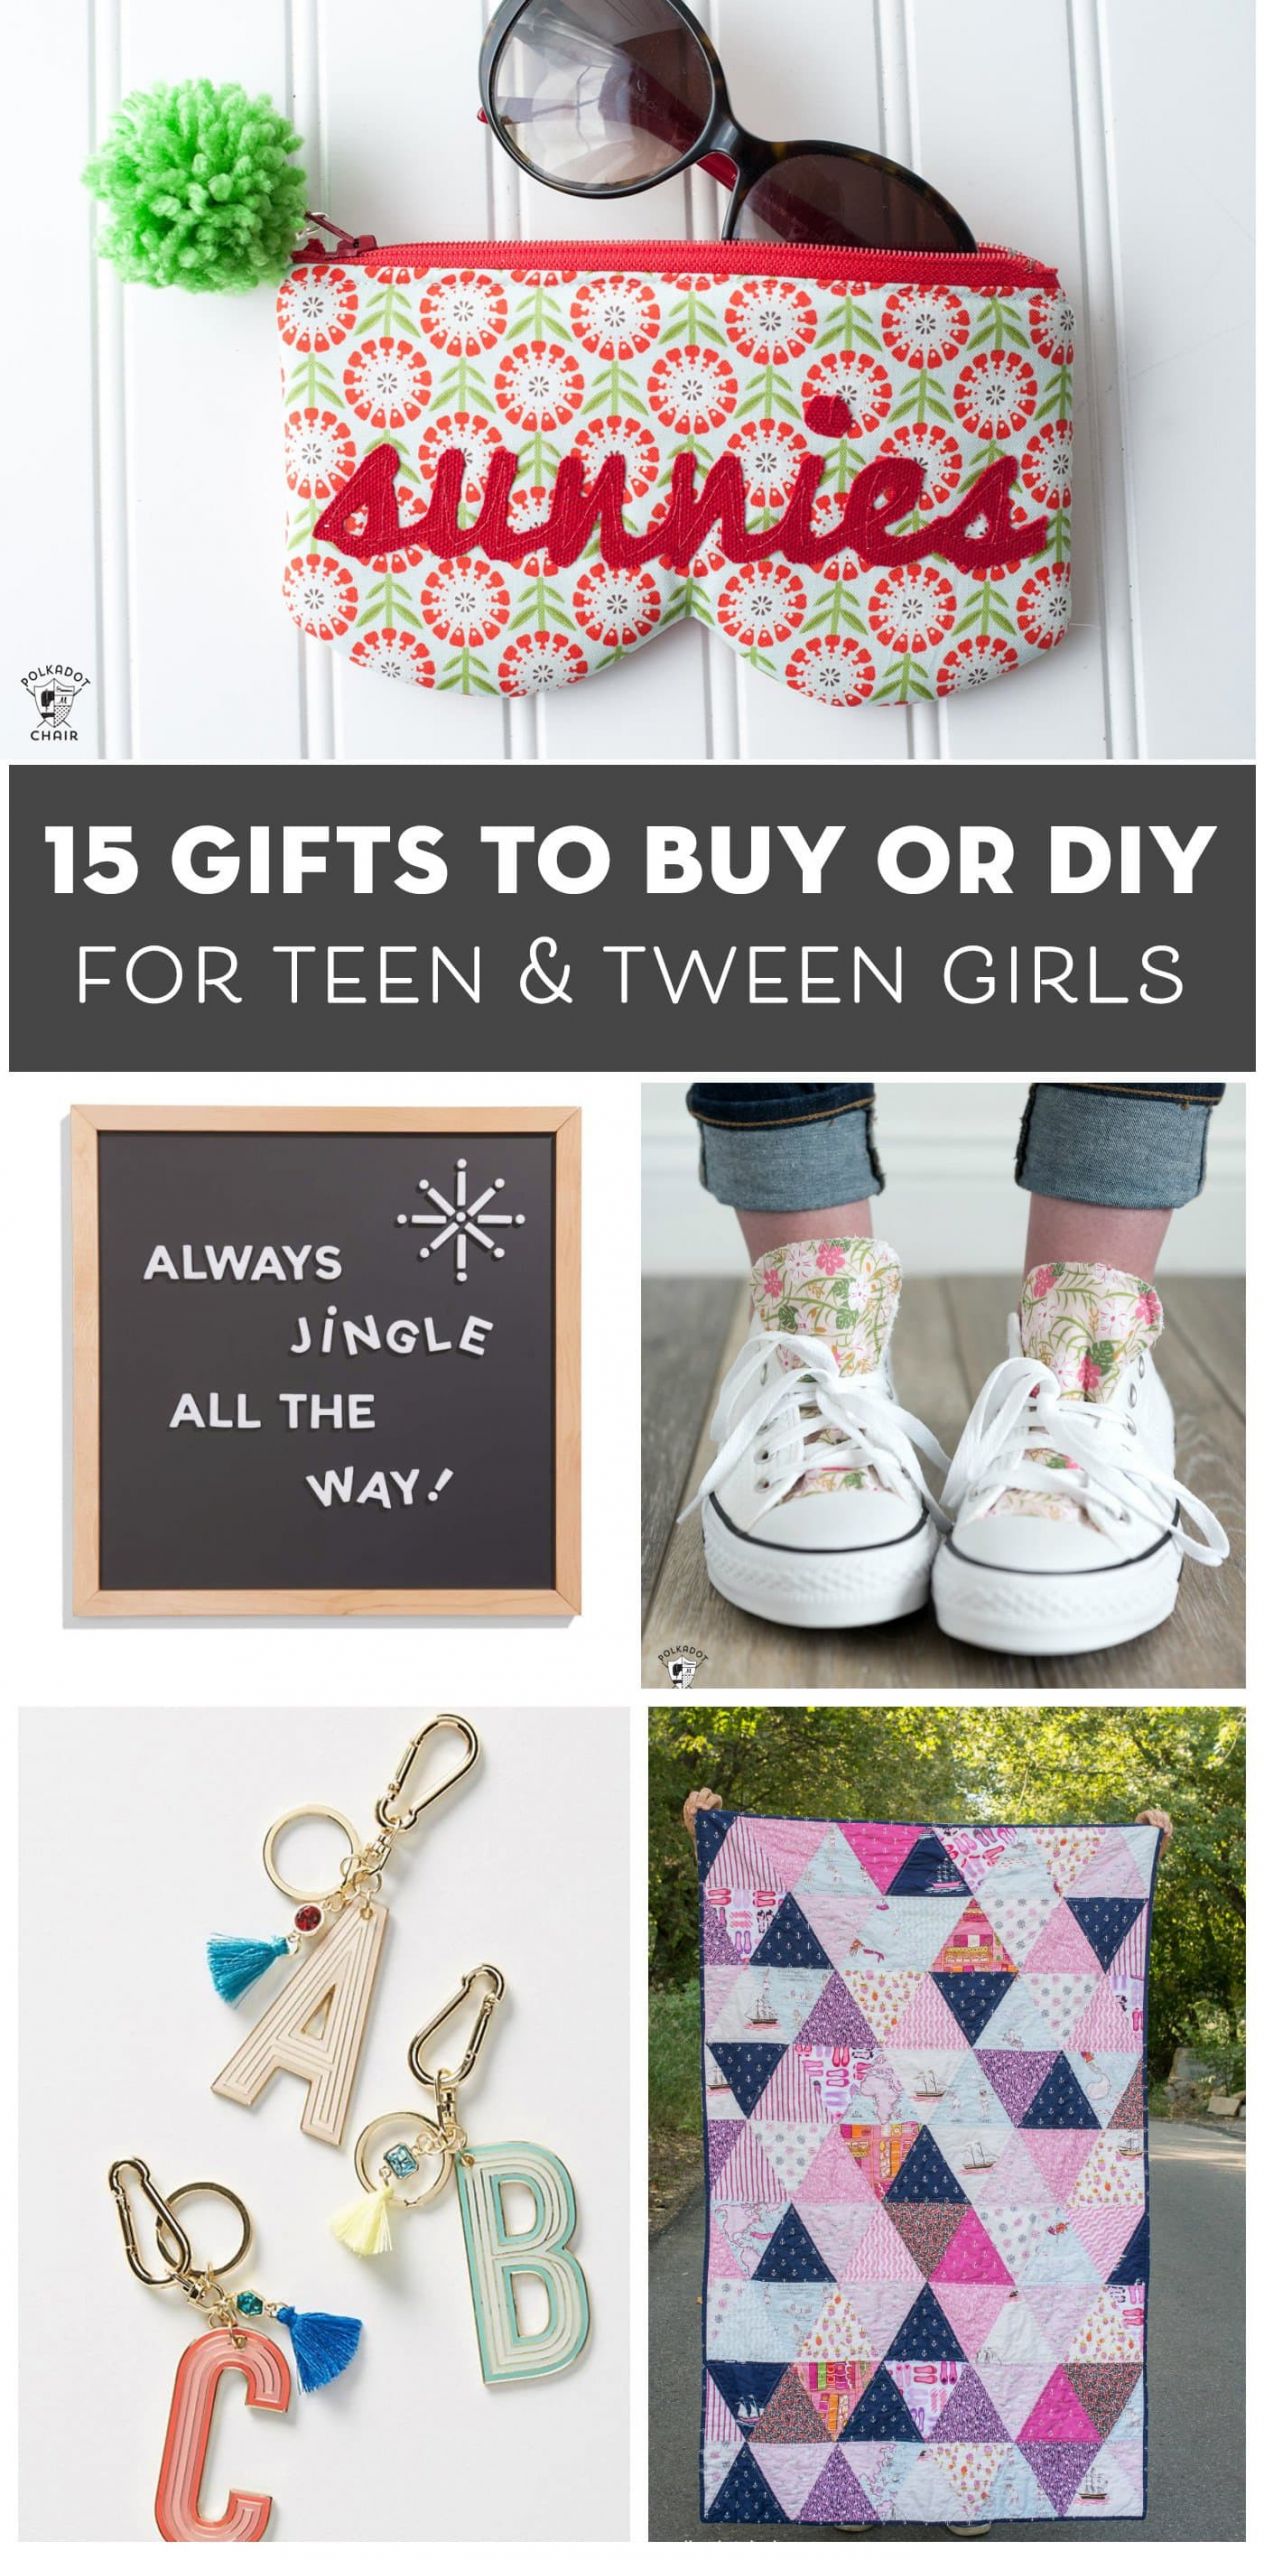 Teenage Girlfriend Gift Ideas
 15 Gift Ideas for Teenage Girls That You Can DIY or Buy